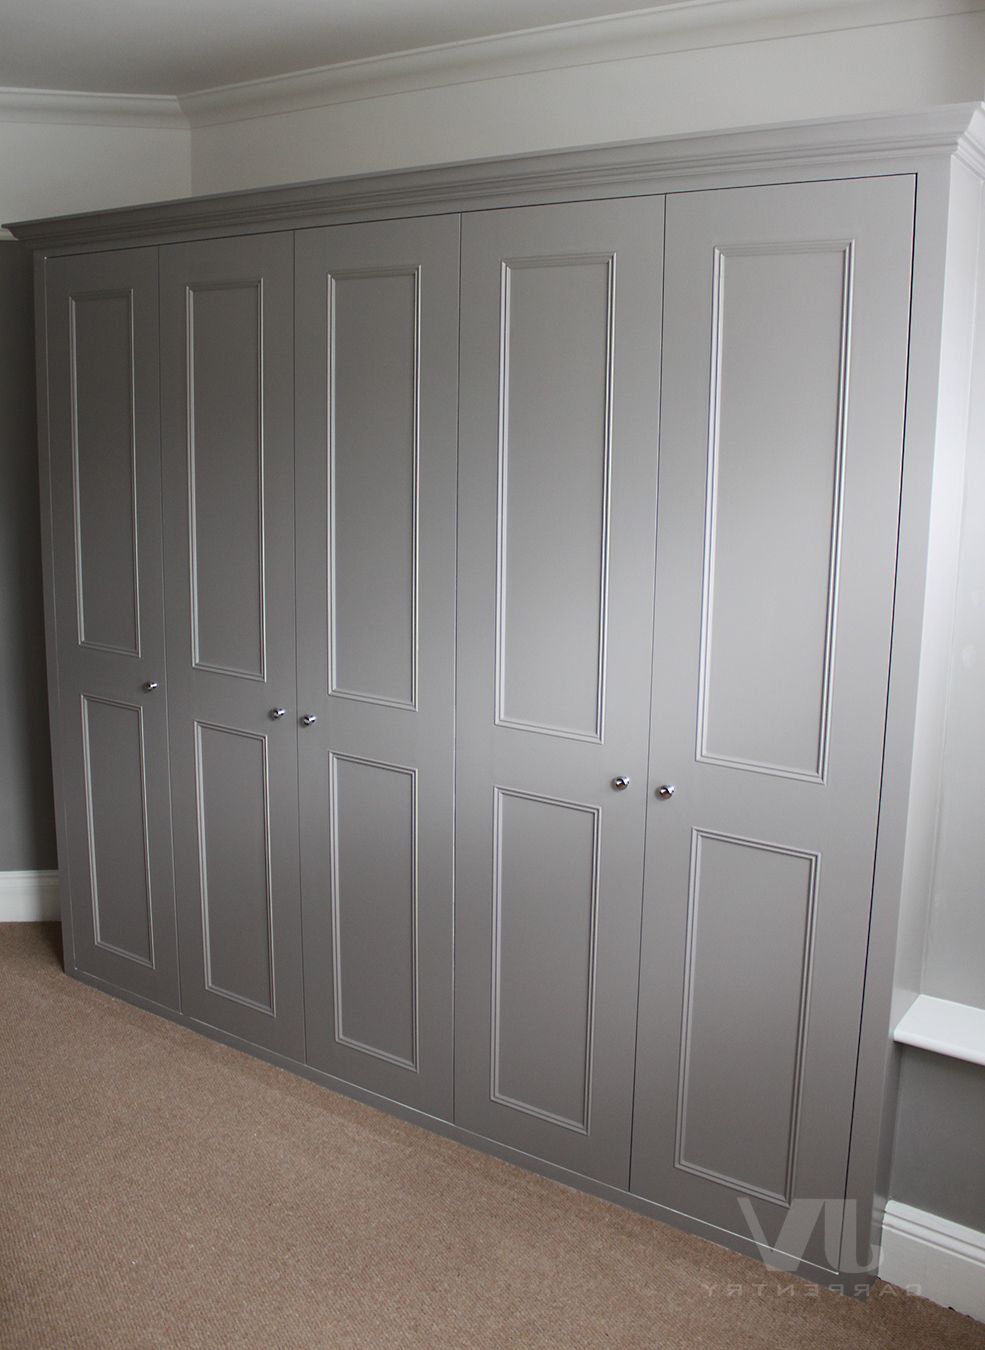 14 Grey Fitted Wardrobes Ideas For Your Bedroom | Jv Carpentry Throughout Grey Wardrobes (View 14 of 20)